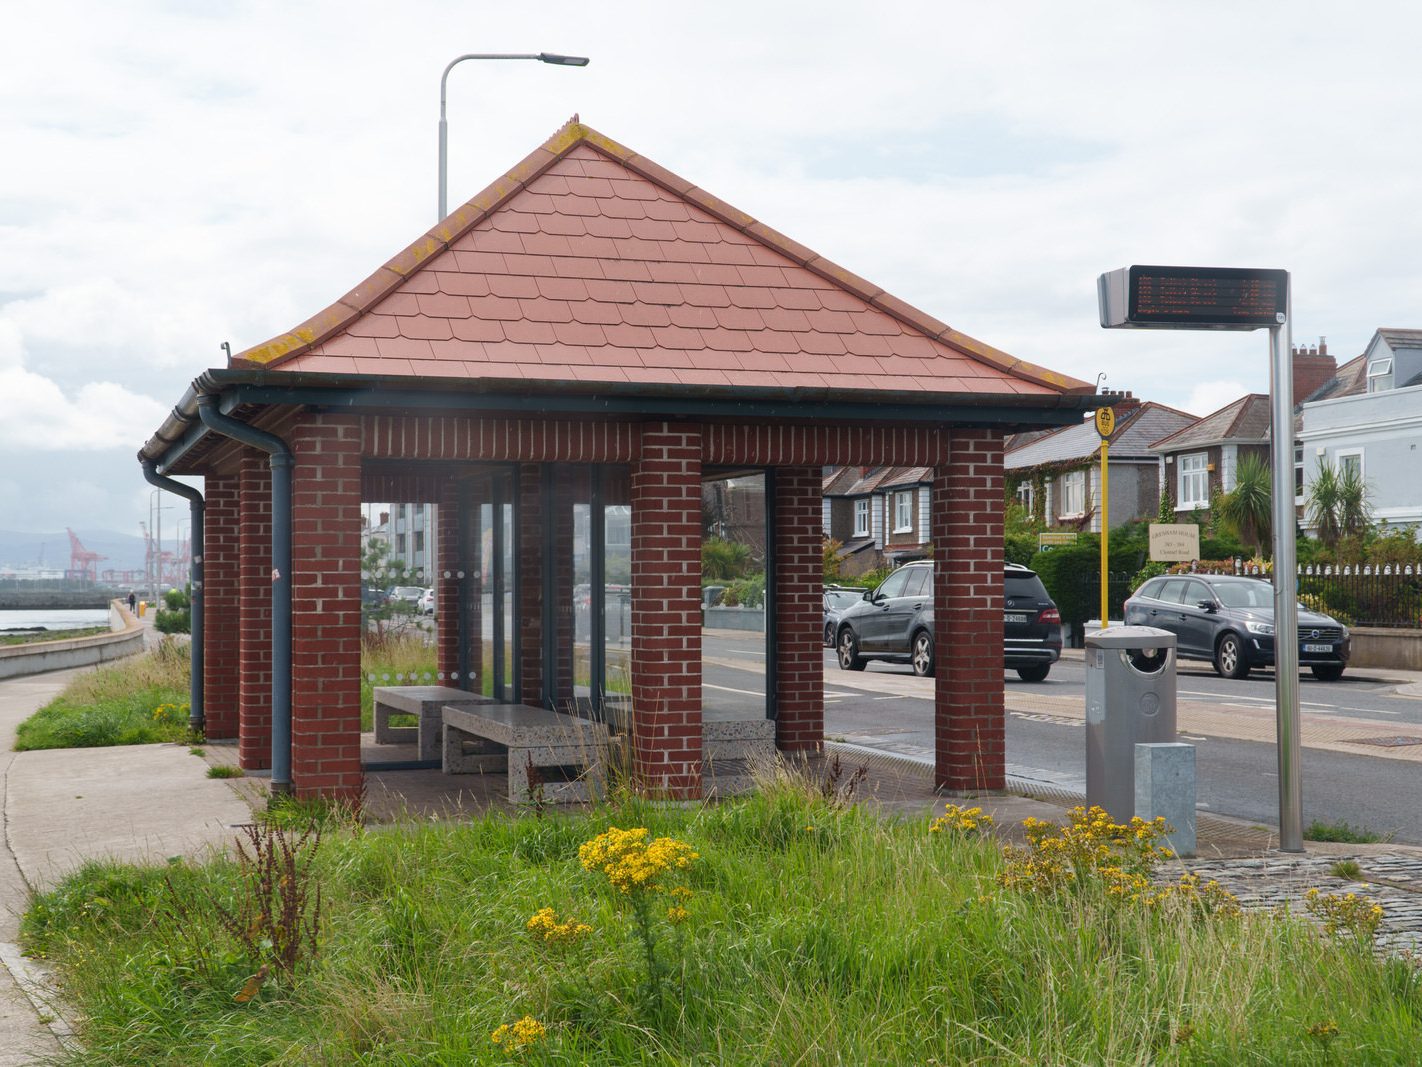 BUS SHELTER 1725 AT DOYLE'S LANE [CLONTARF ROAD AND IT IS THE MOST ATTRACTIVE THAT I HAVE SEEN IN DUBLIN] 001